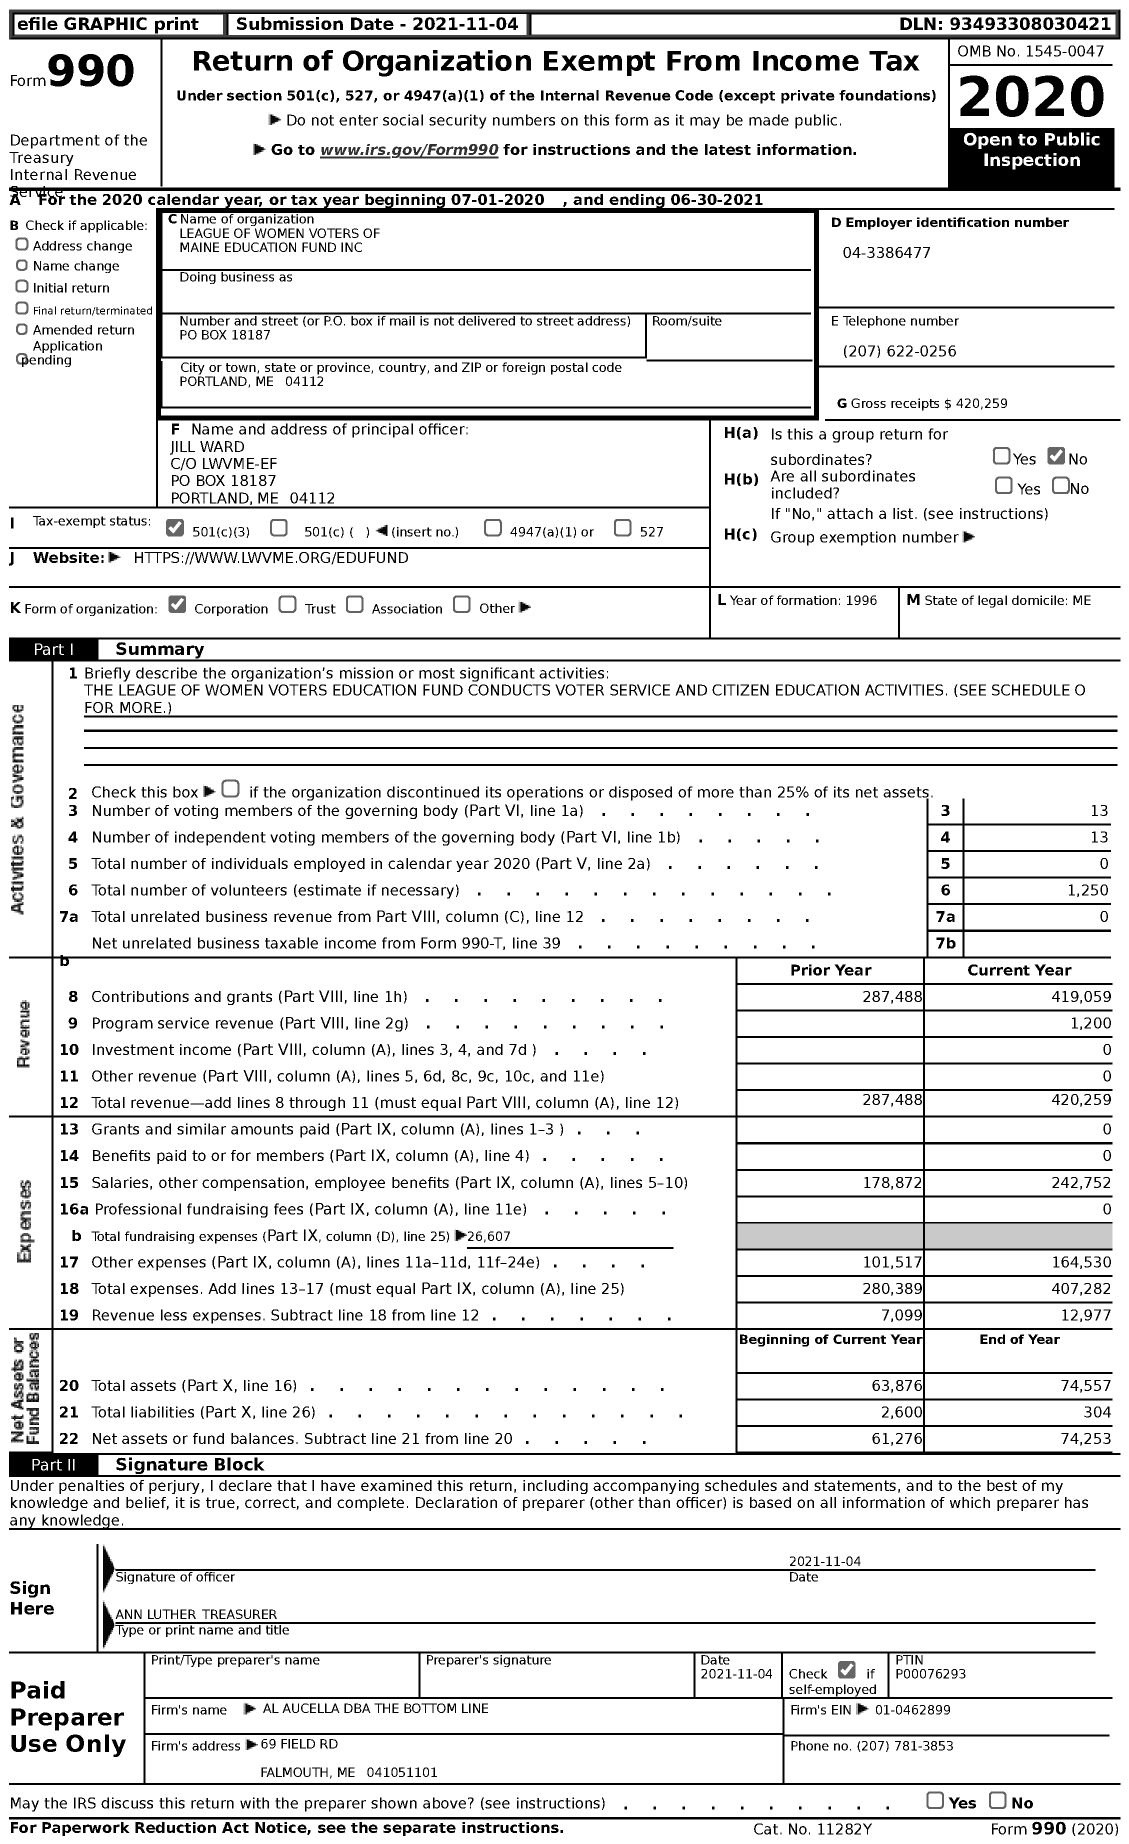 Image of first page of 2020 Form 990 for League of Women Voters of Maine Education Fund